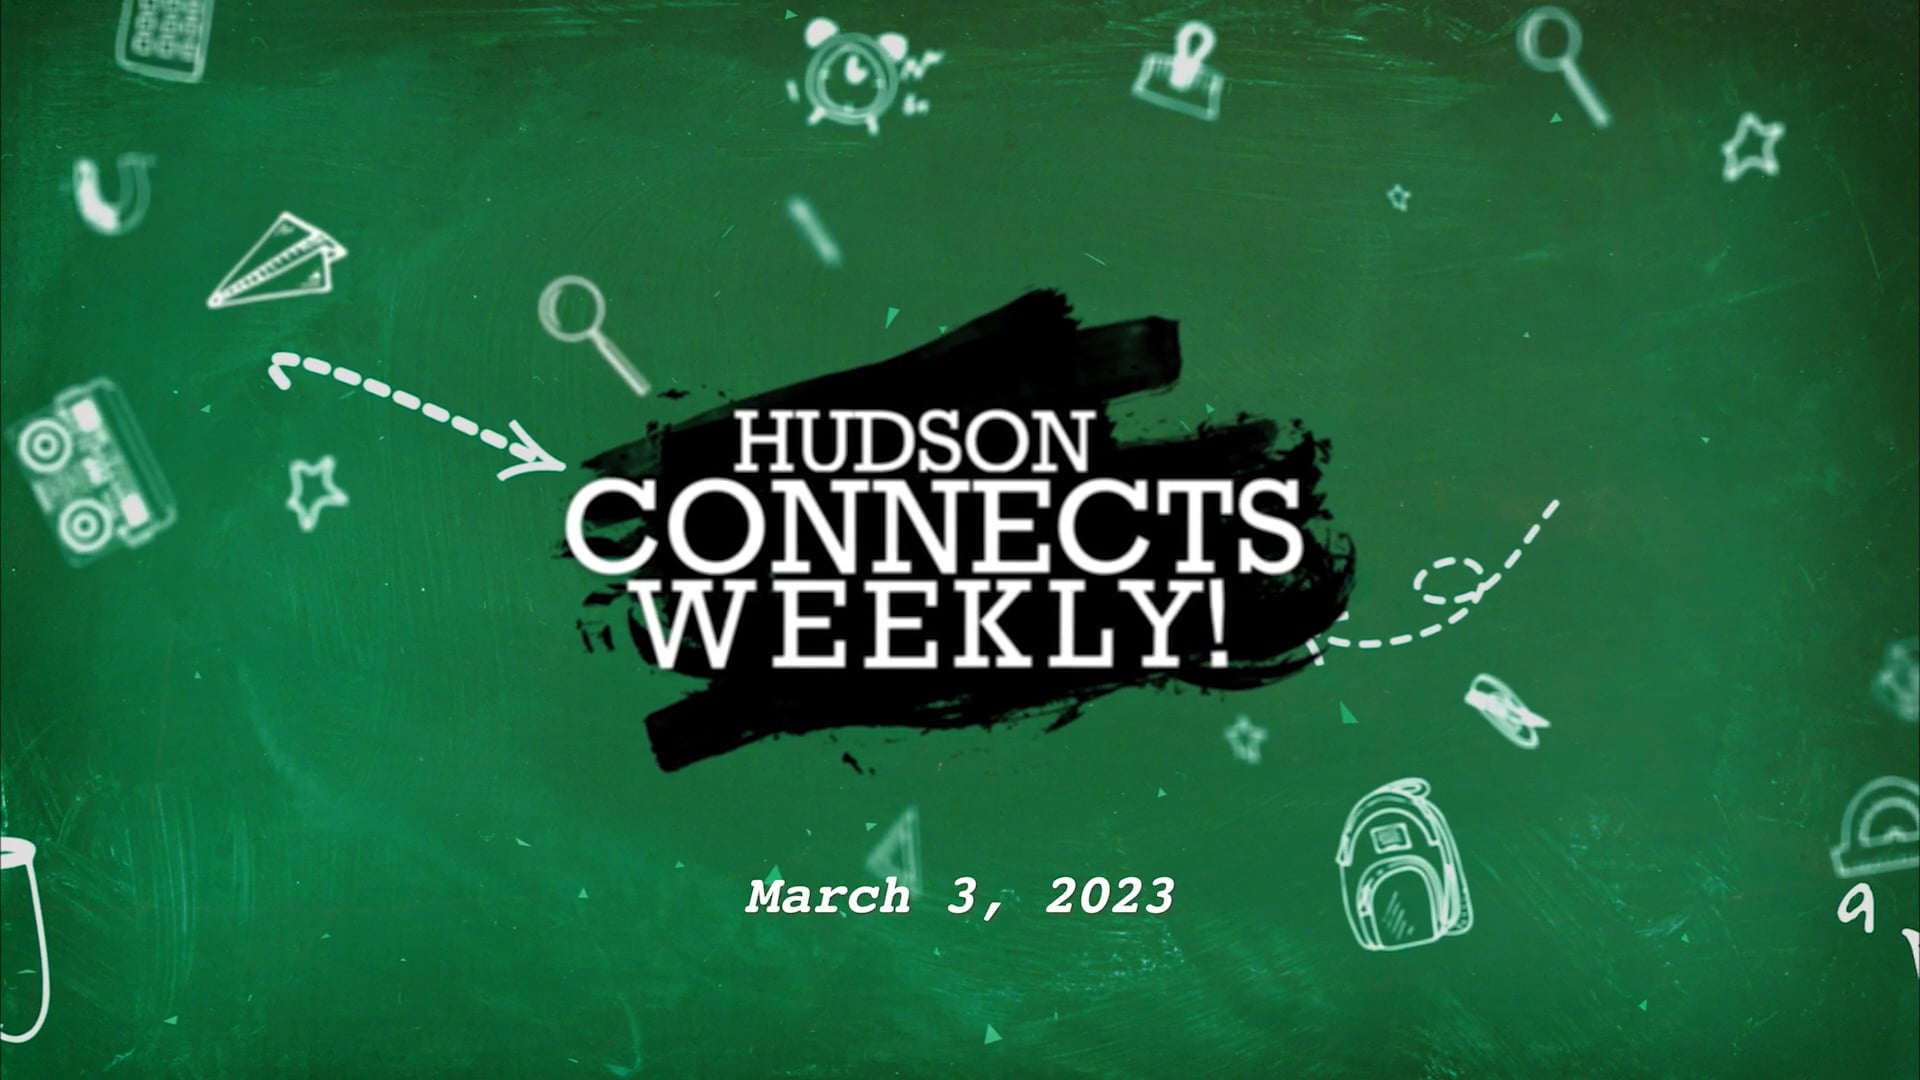 Hudson Connects Weekly - March 3, 2023